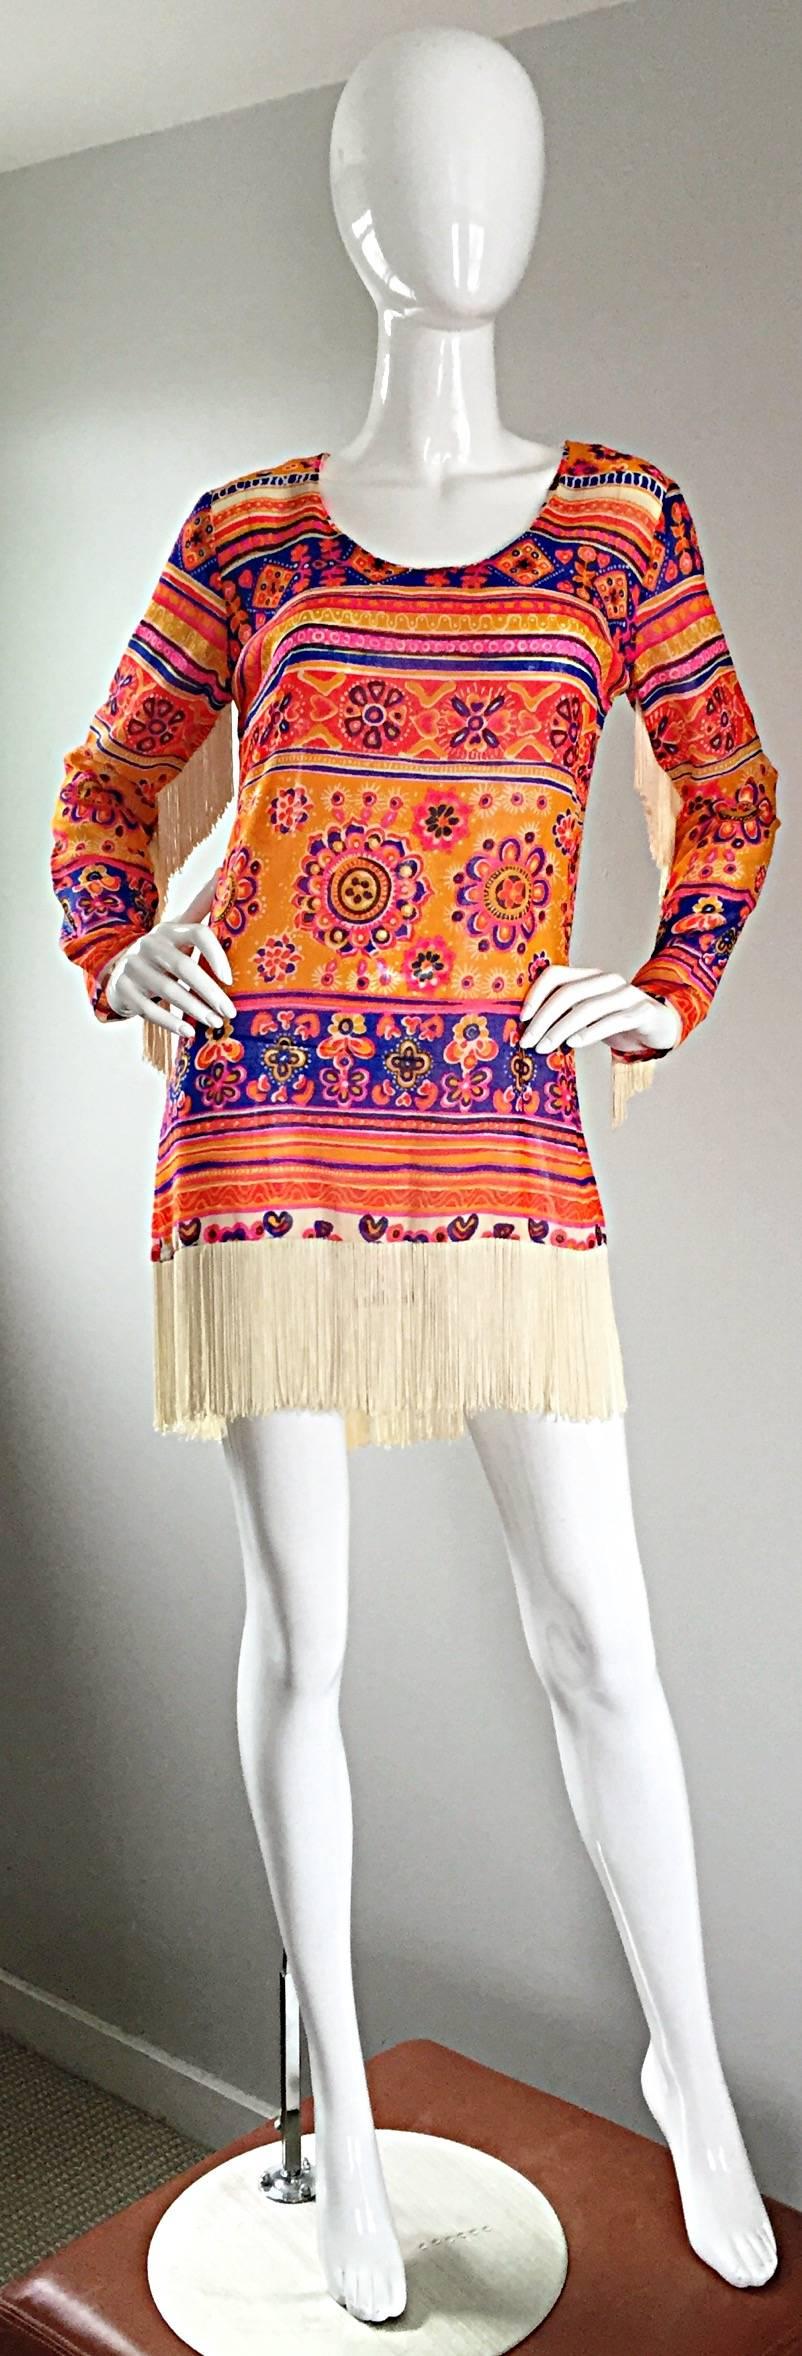 Amazing vintage 70s VICOTR BIJOU, for Joseph Magnin, colorful cotton ethnic bohhemian fringed tunic, or dress! Lightweight cotton, with vibrant ethnic print, Ivory fringe at hem, and down each back sleeve. Looks amazing on! Great belted, or alone.